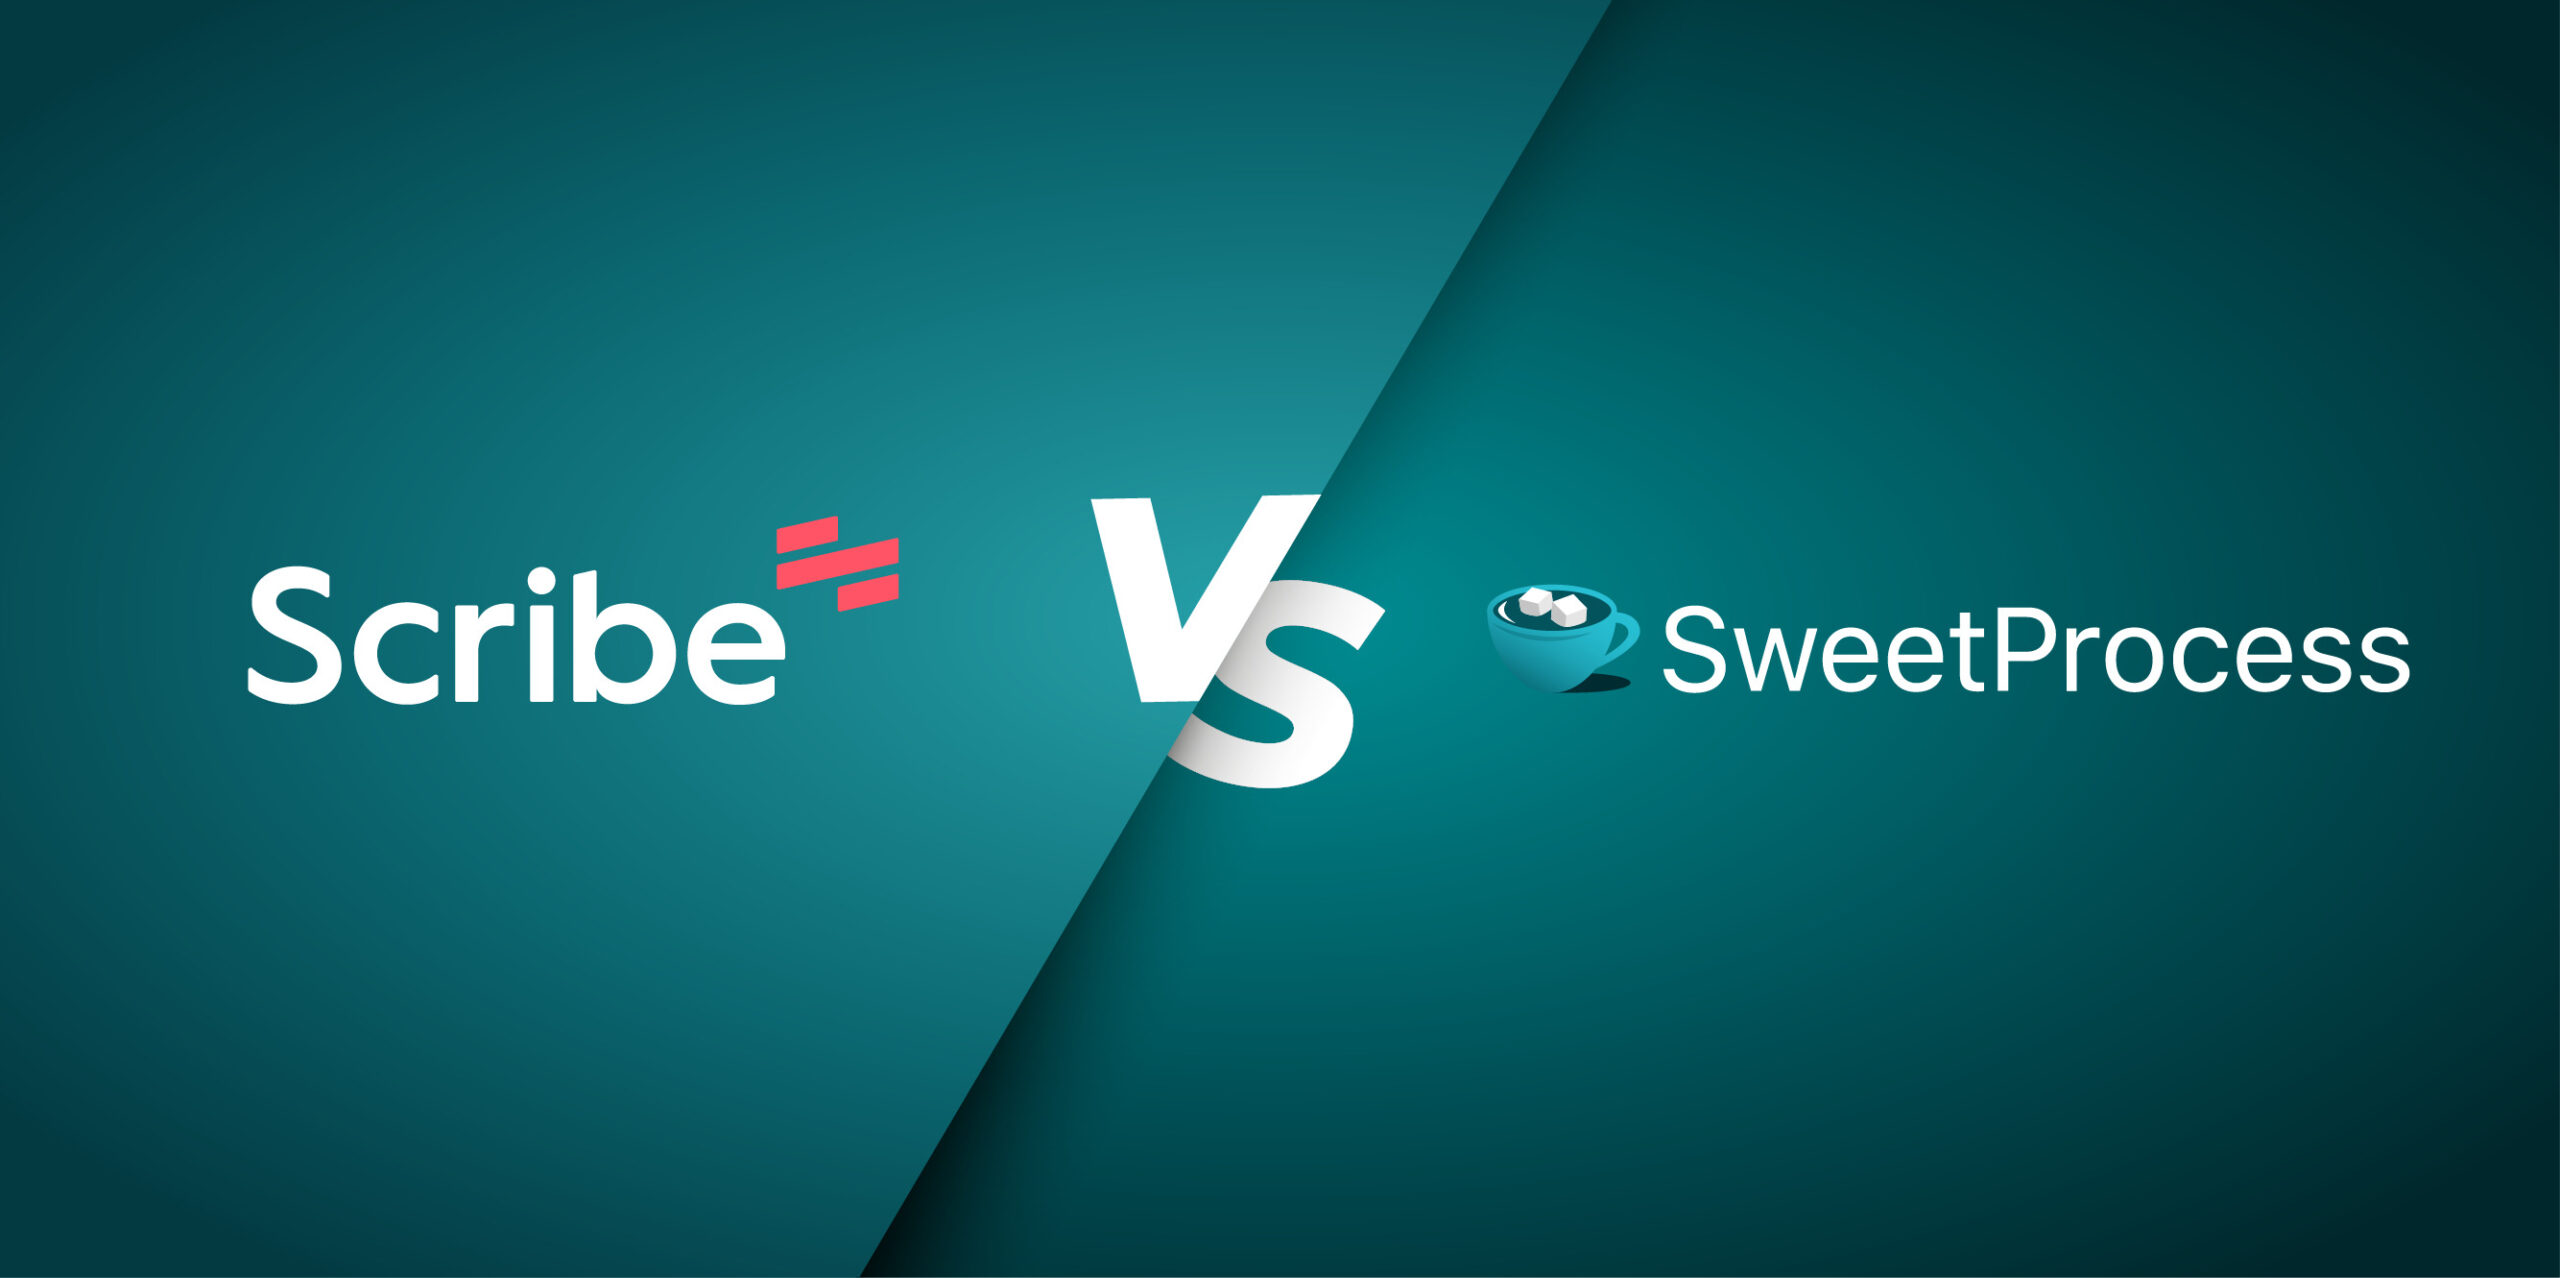 Scribe Vs SweetProcess: Which Tool Best Documents Policies